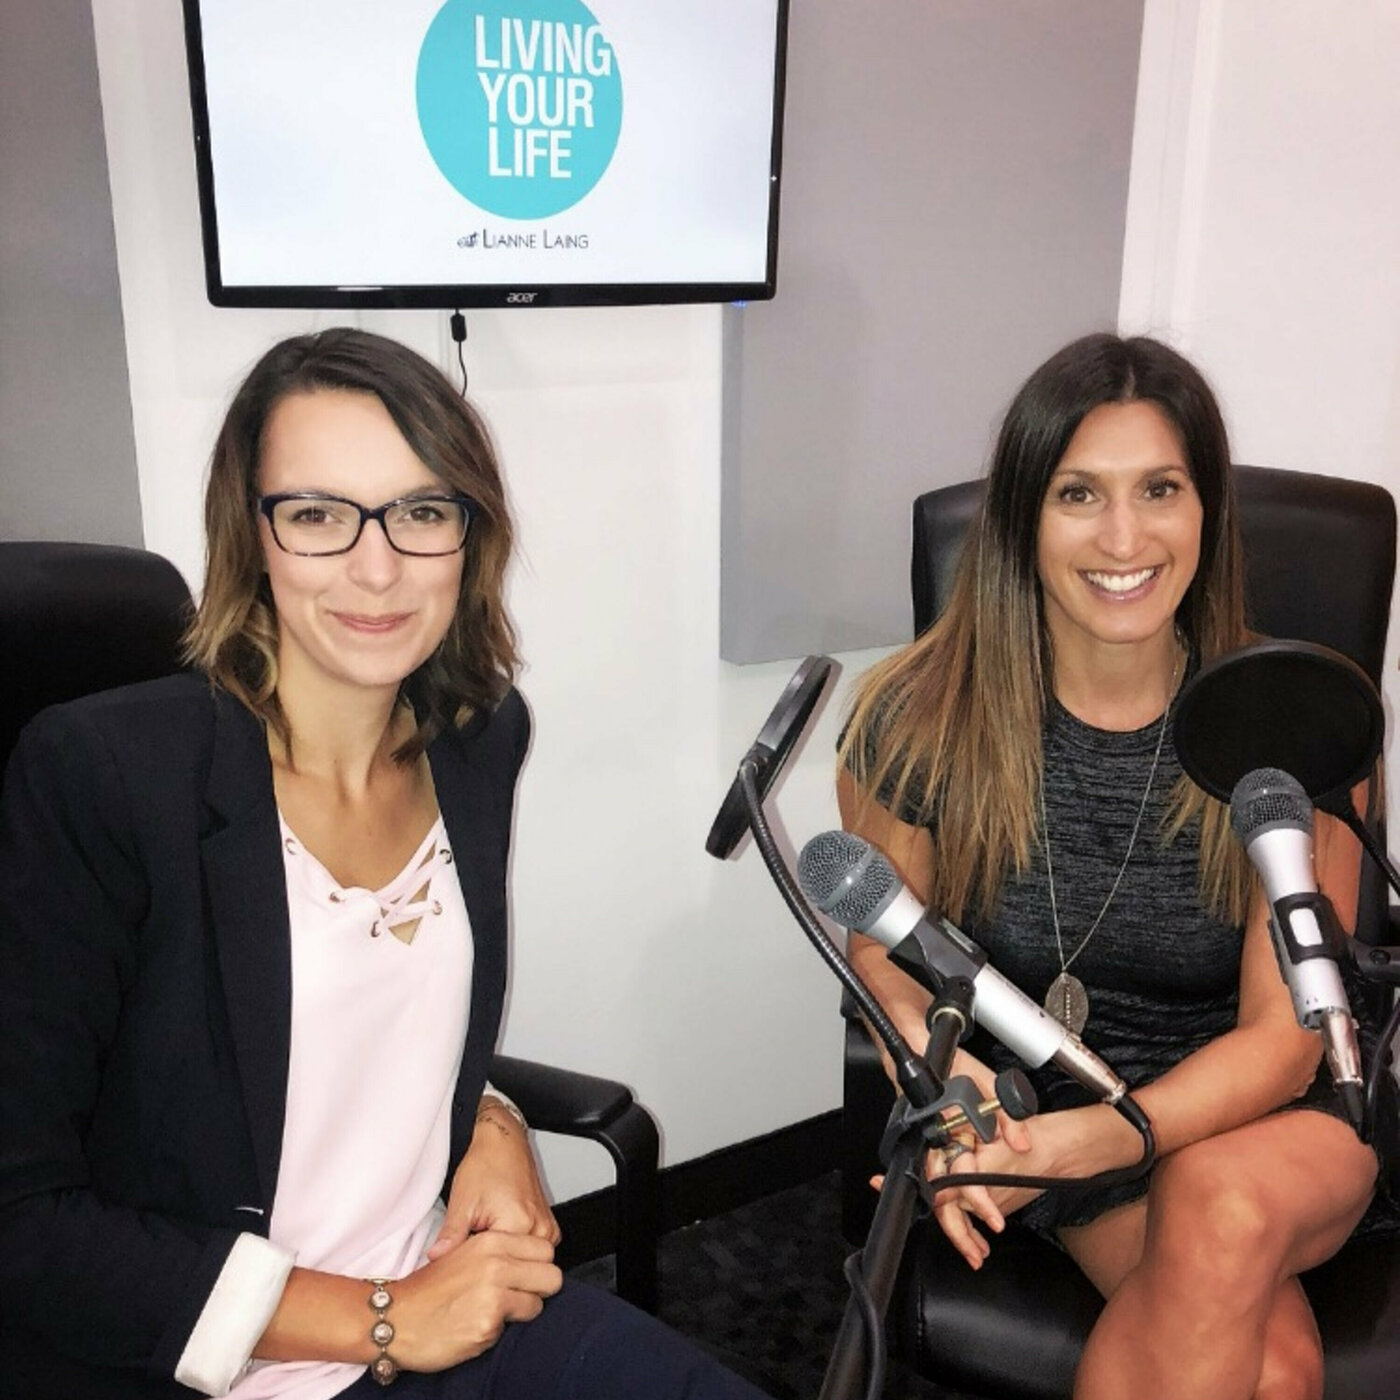 Why Cleaning House Can be Good for Your Health - My Discussion with Veronique Levesque